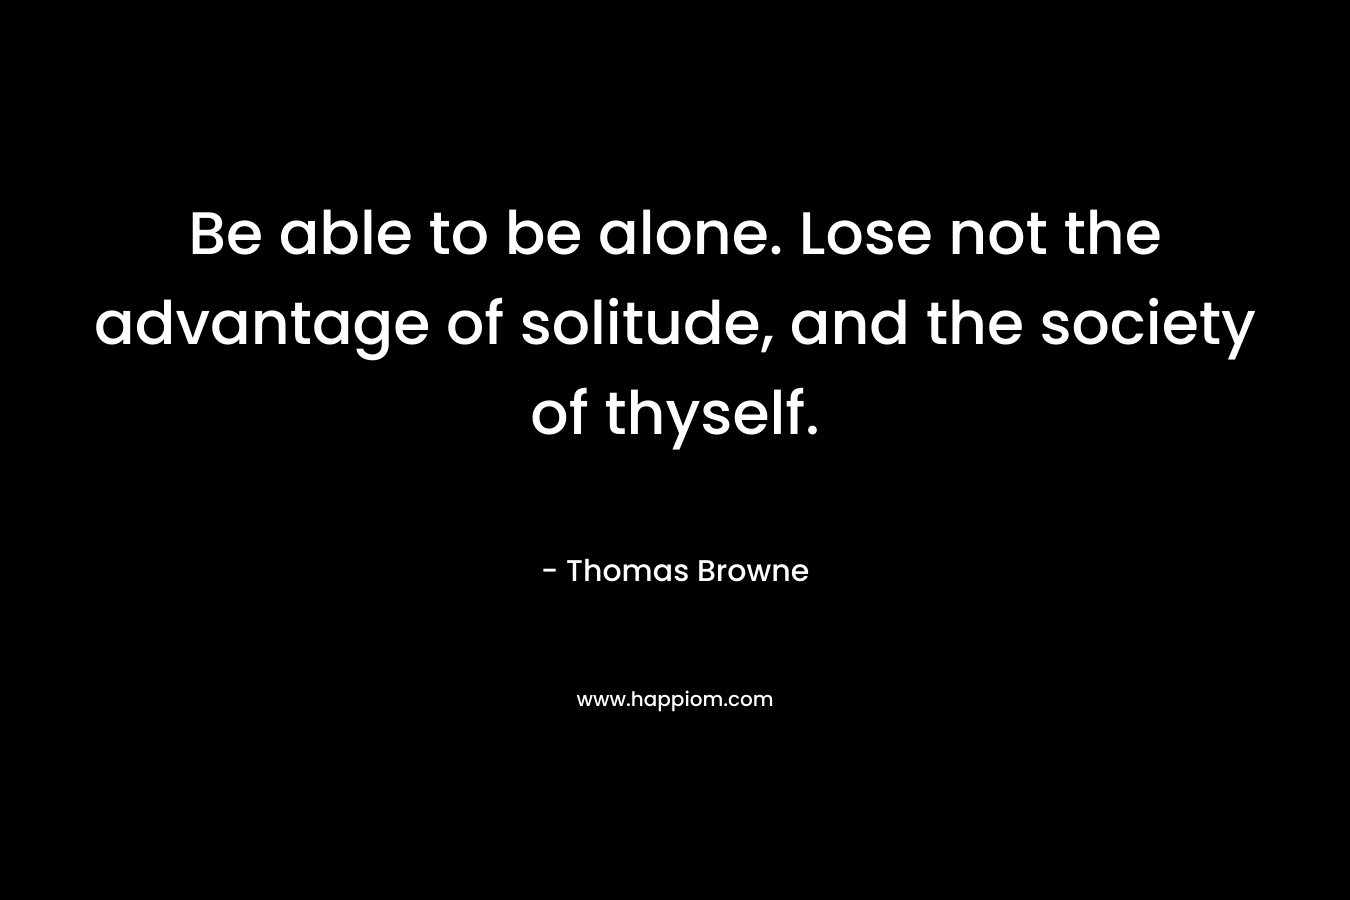 Be able to be alone. Lose not the advantage of solitude, and the society of thyself. – Thomas Browne